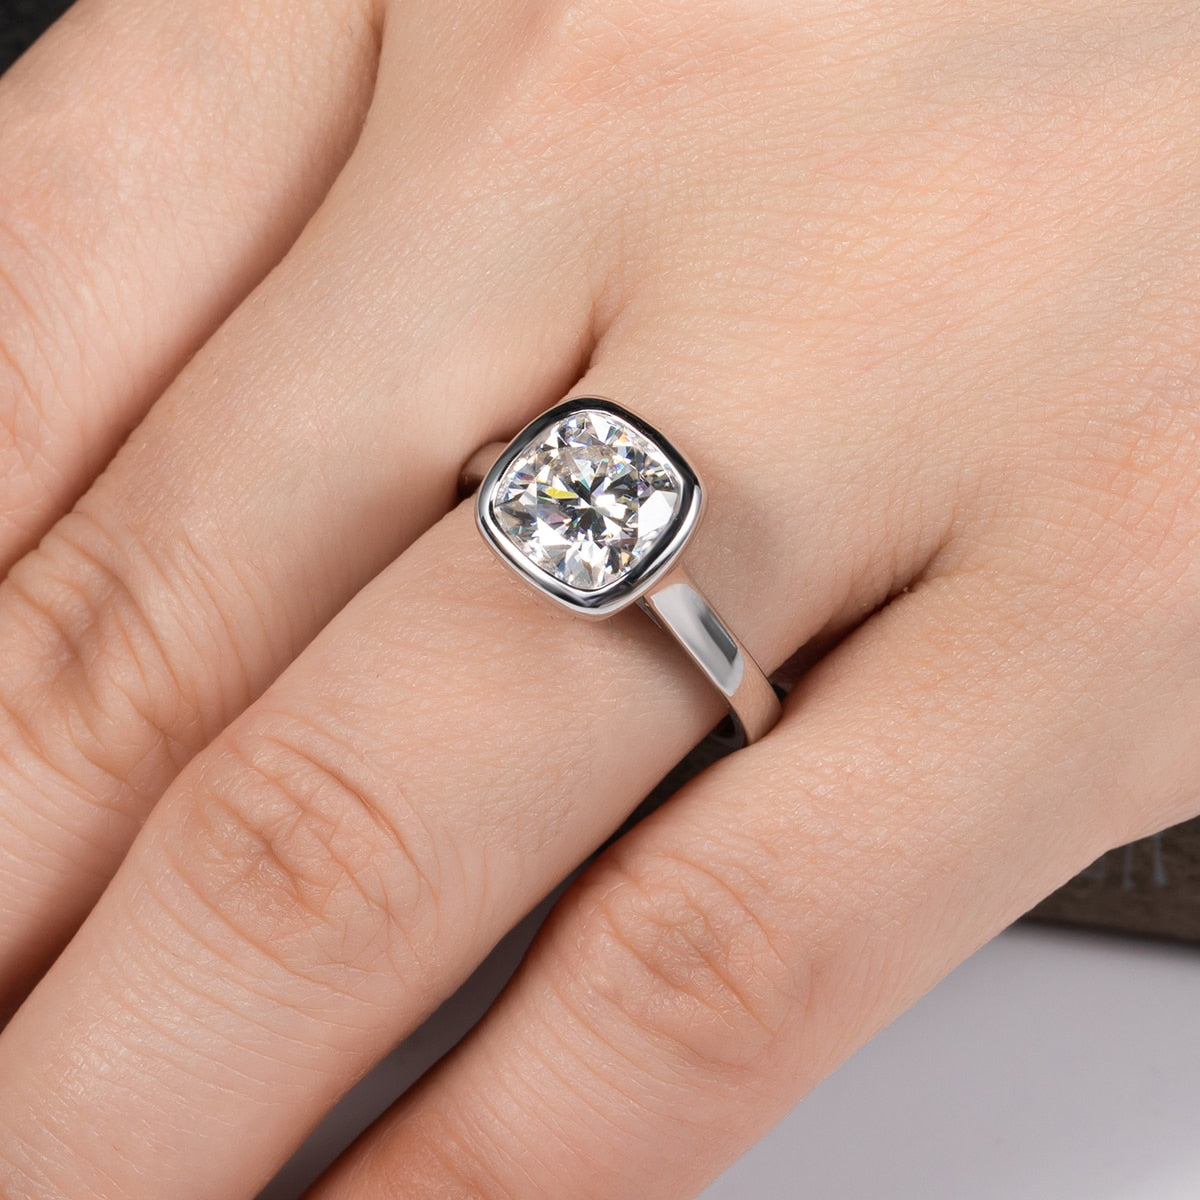 Hand wearing a sterling silver ring with a 3CT cushion cut moissanite gem bezel set.